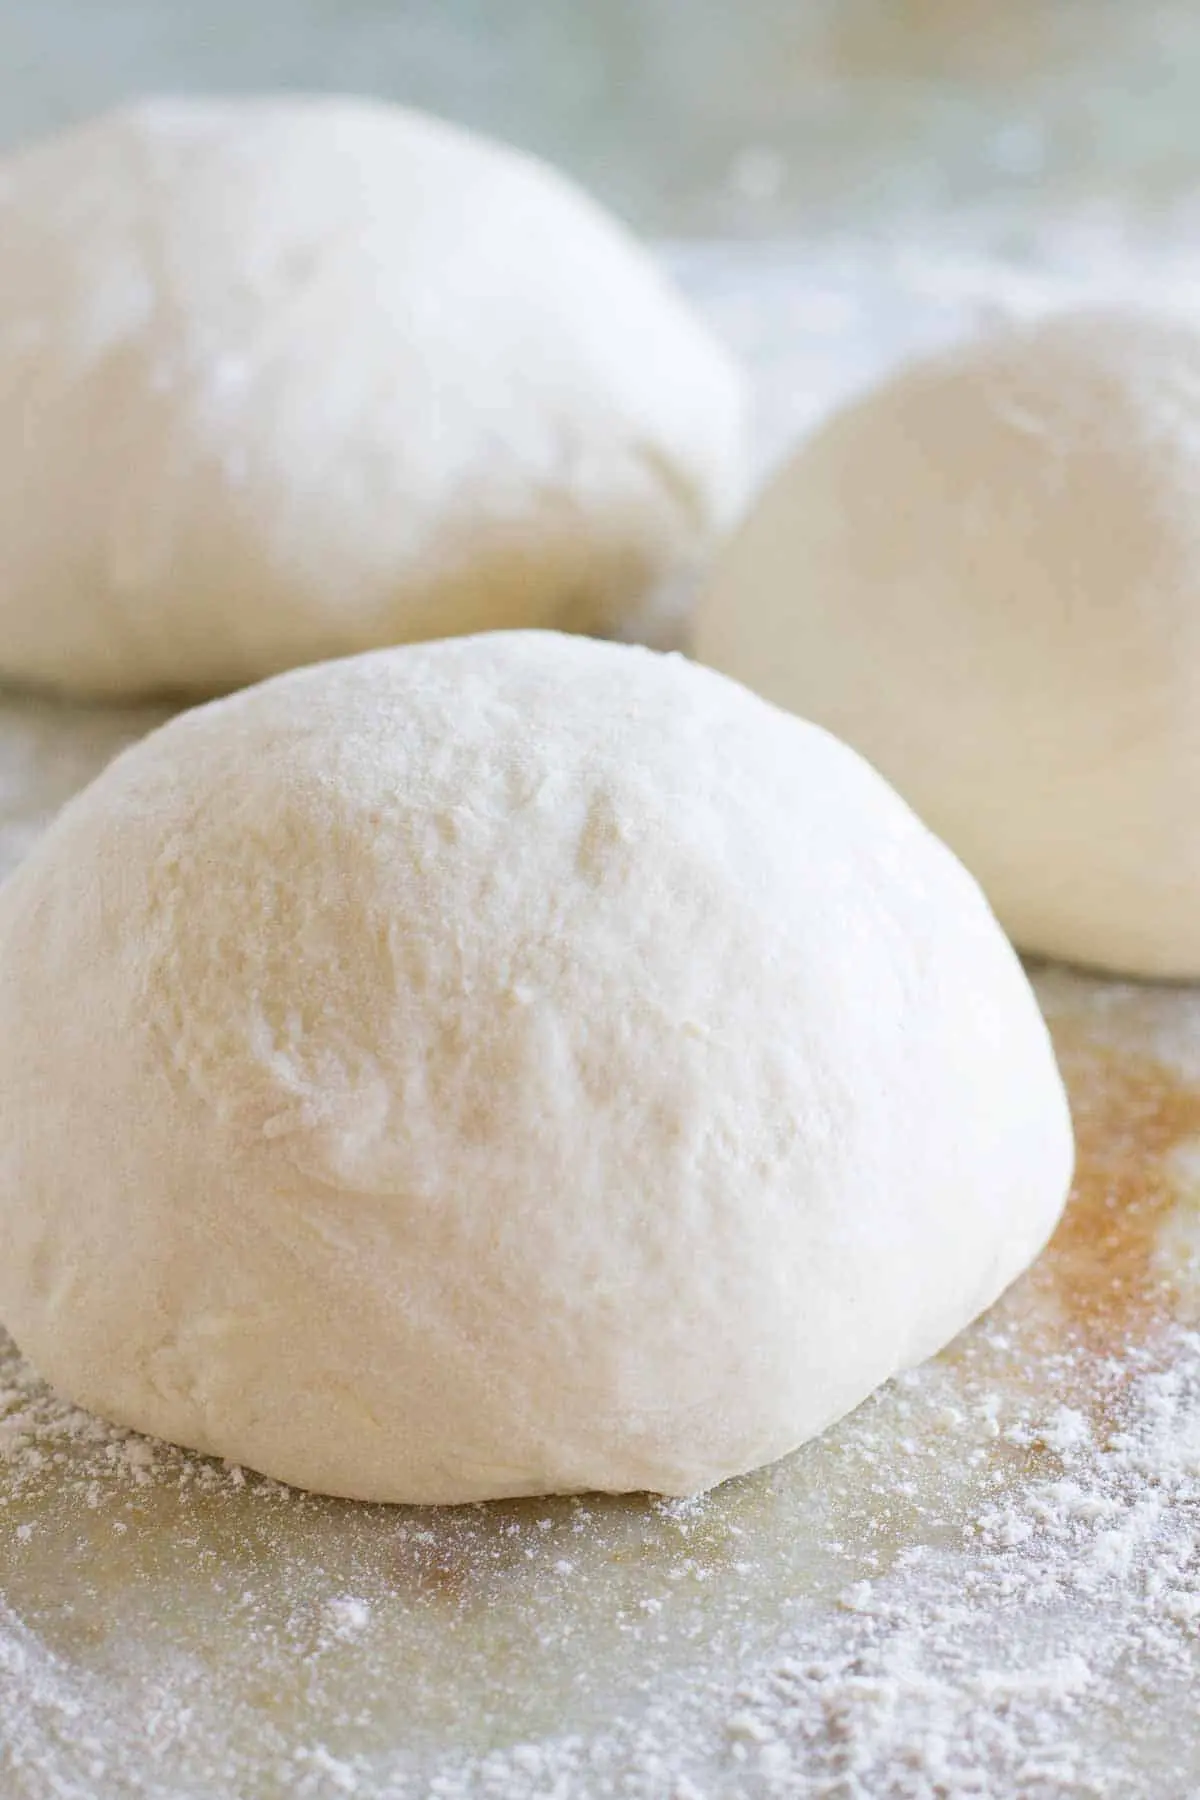 pizza dough recipes - What not to do when making pizza dough